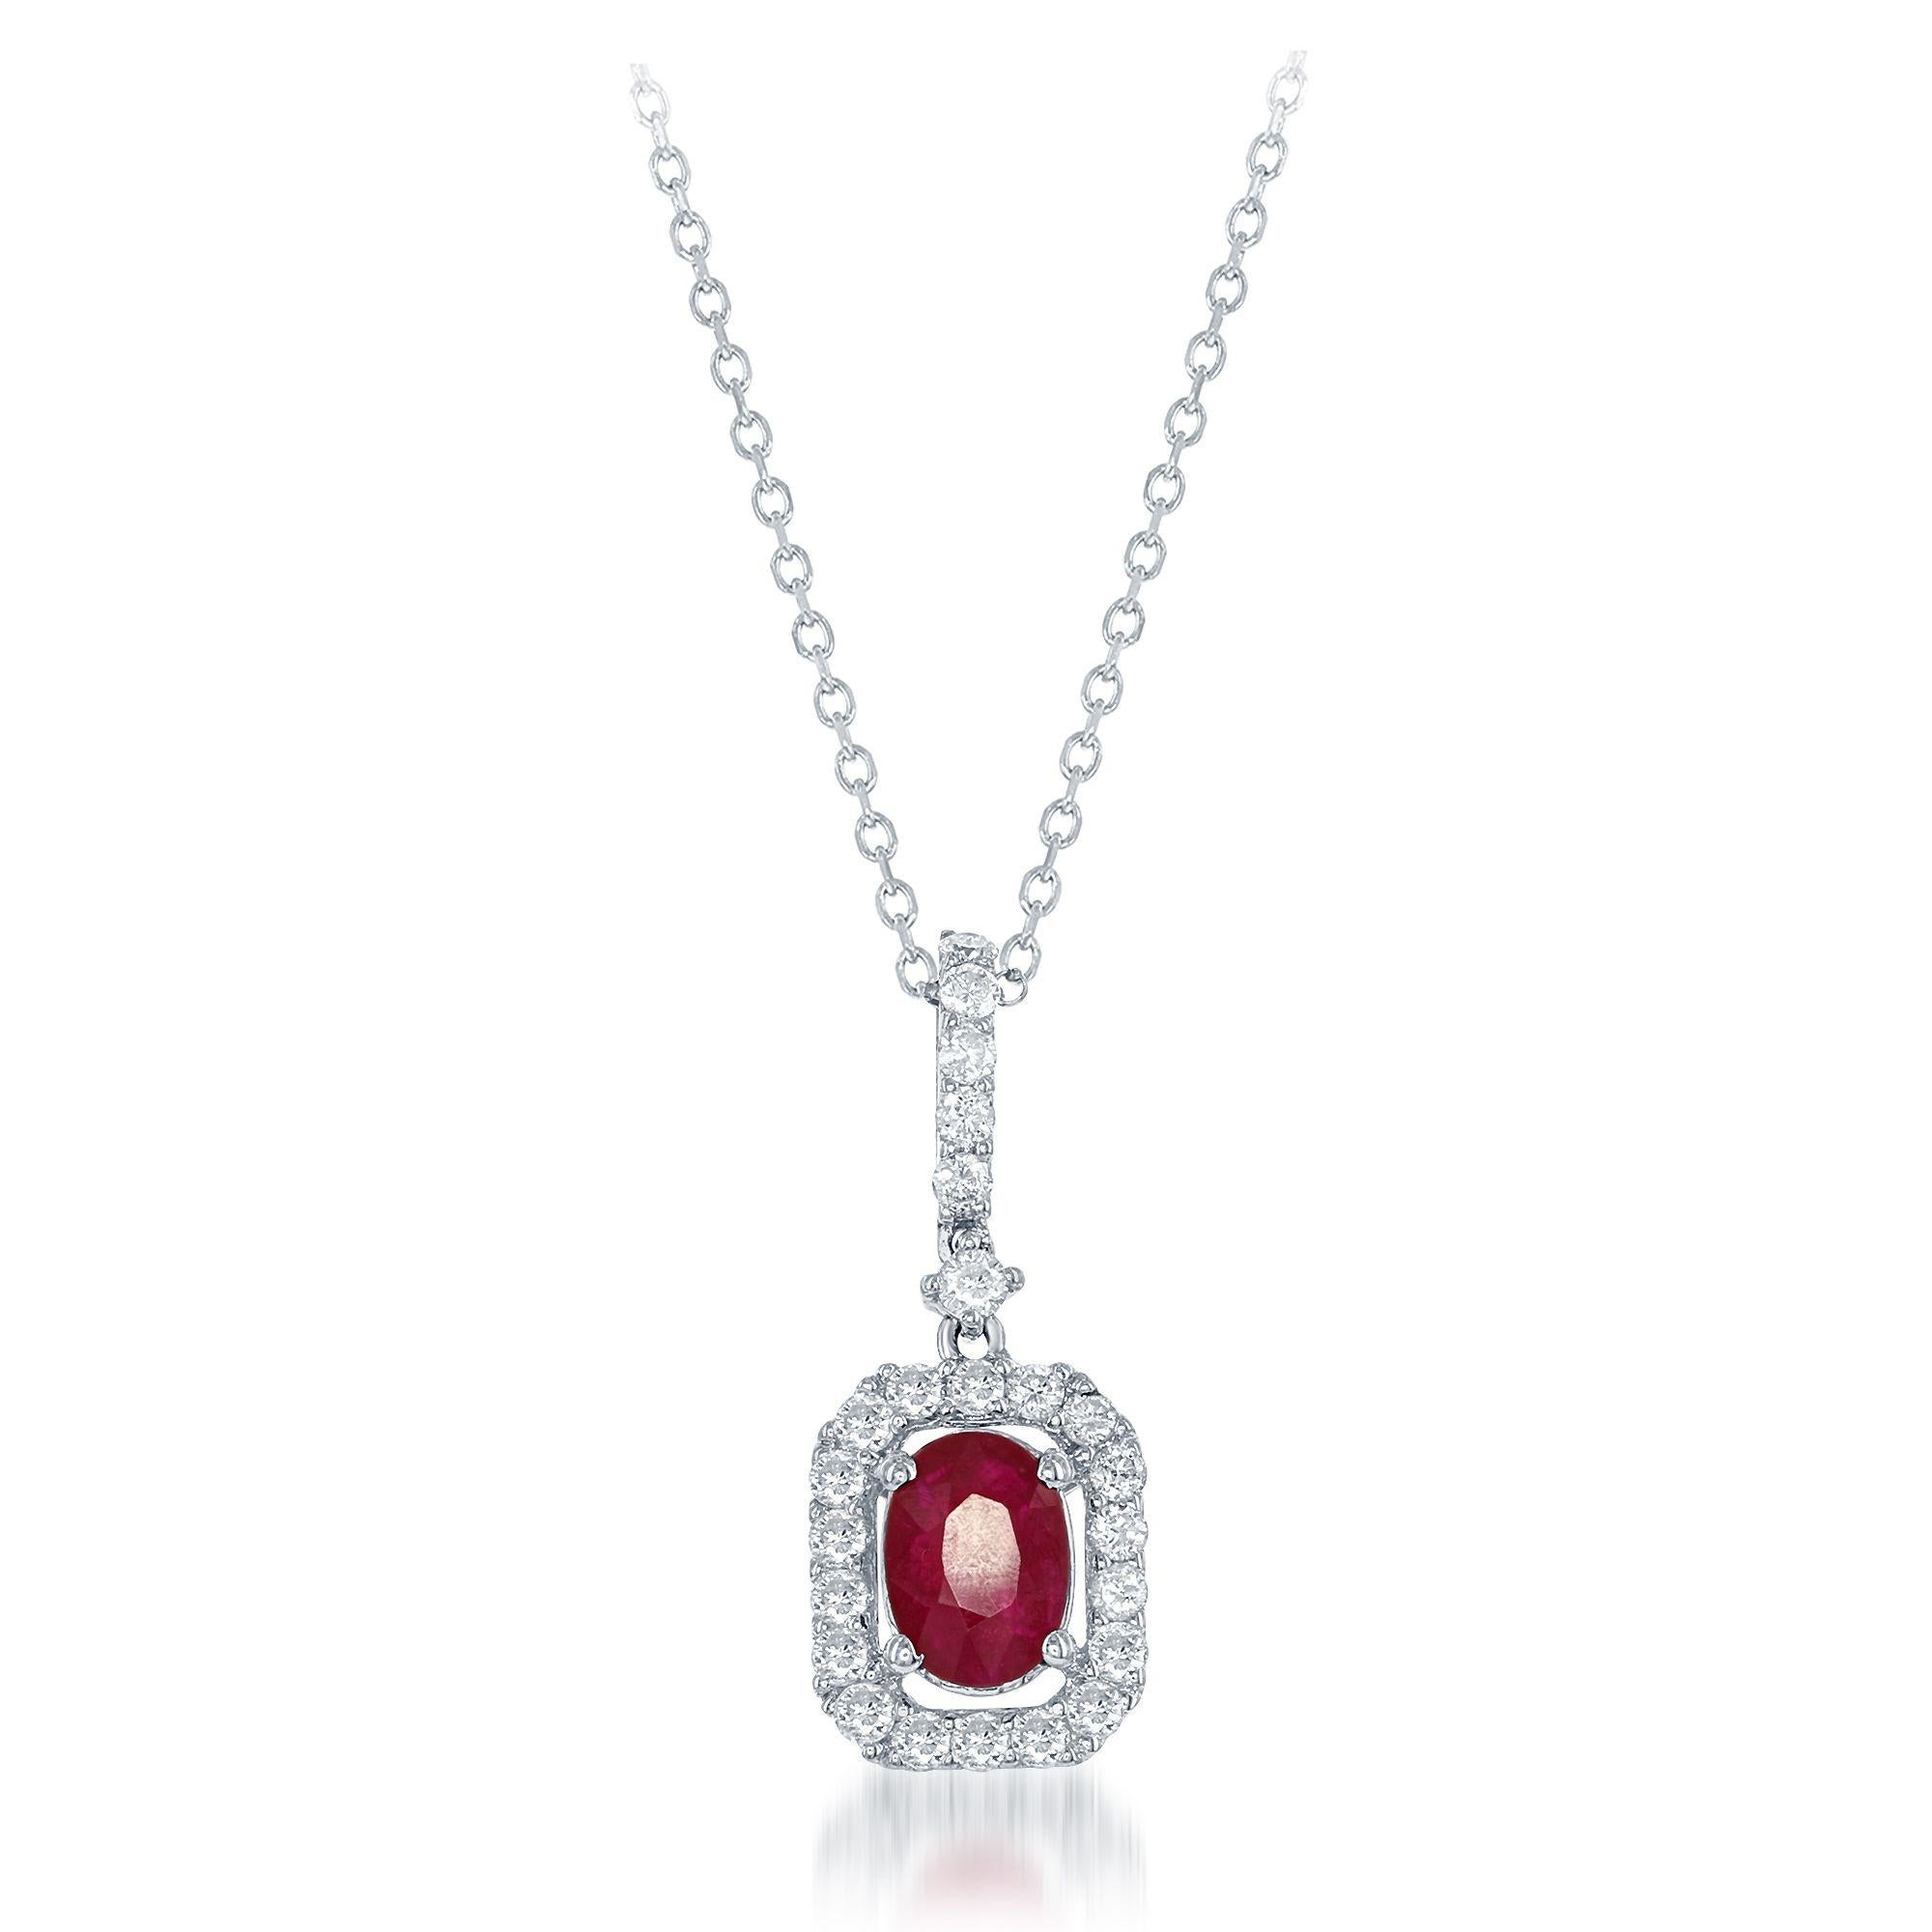 1.00ct oval ruby surrounded by 0.70 cts round diamonds creating a halo pendant